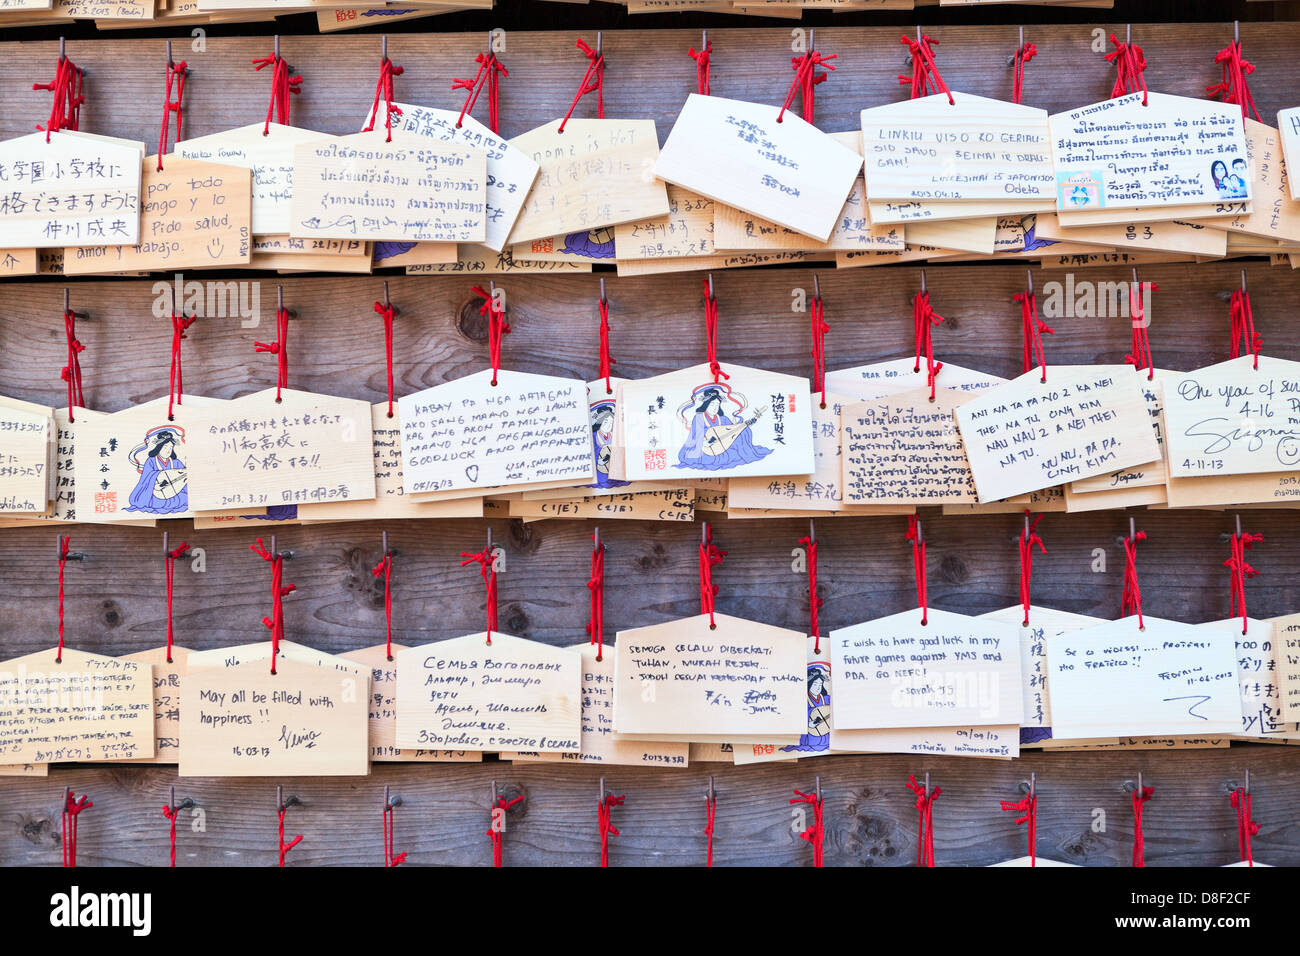 Ema background are small wooden plaques on which Shinto worshippers write their prayers or wishes. Kamakura, Japan Stock Photo